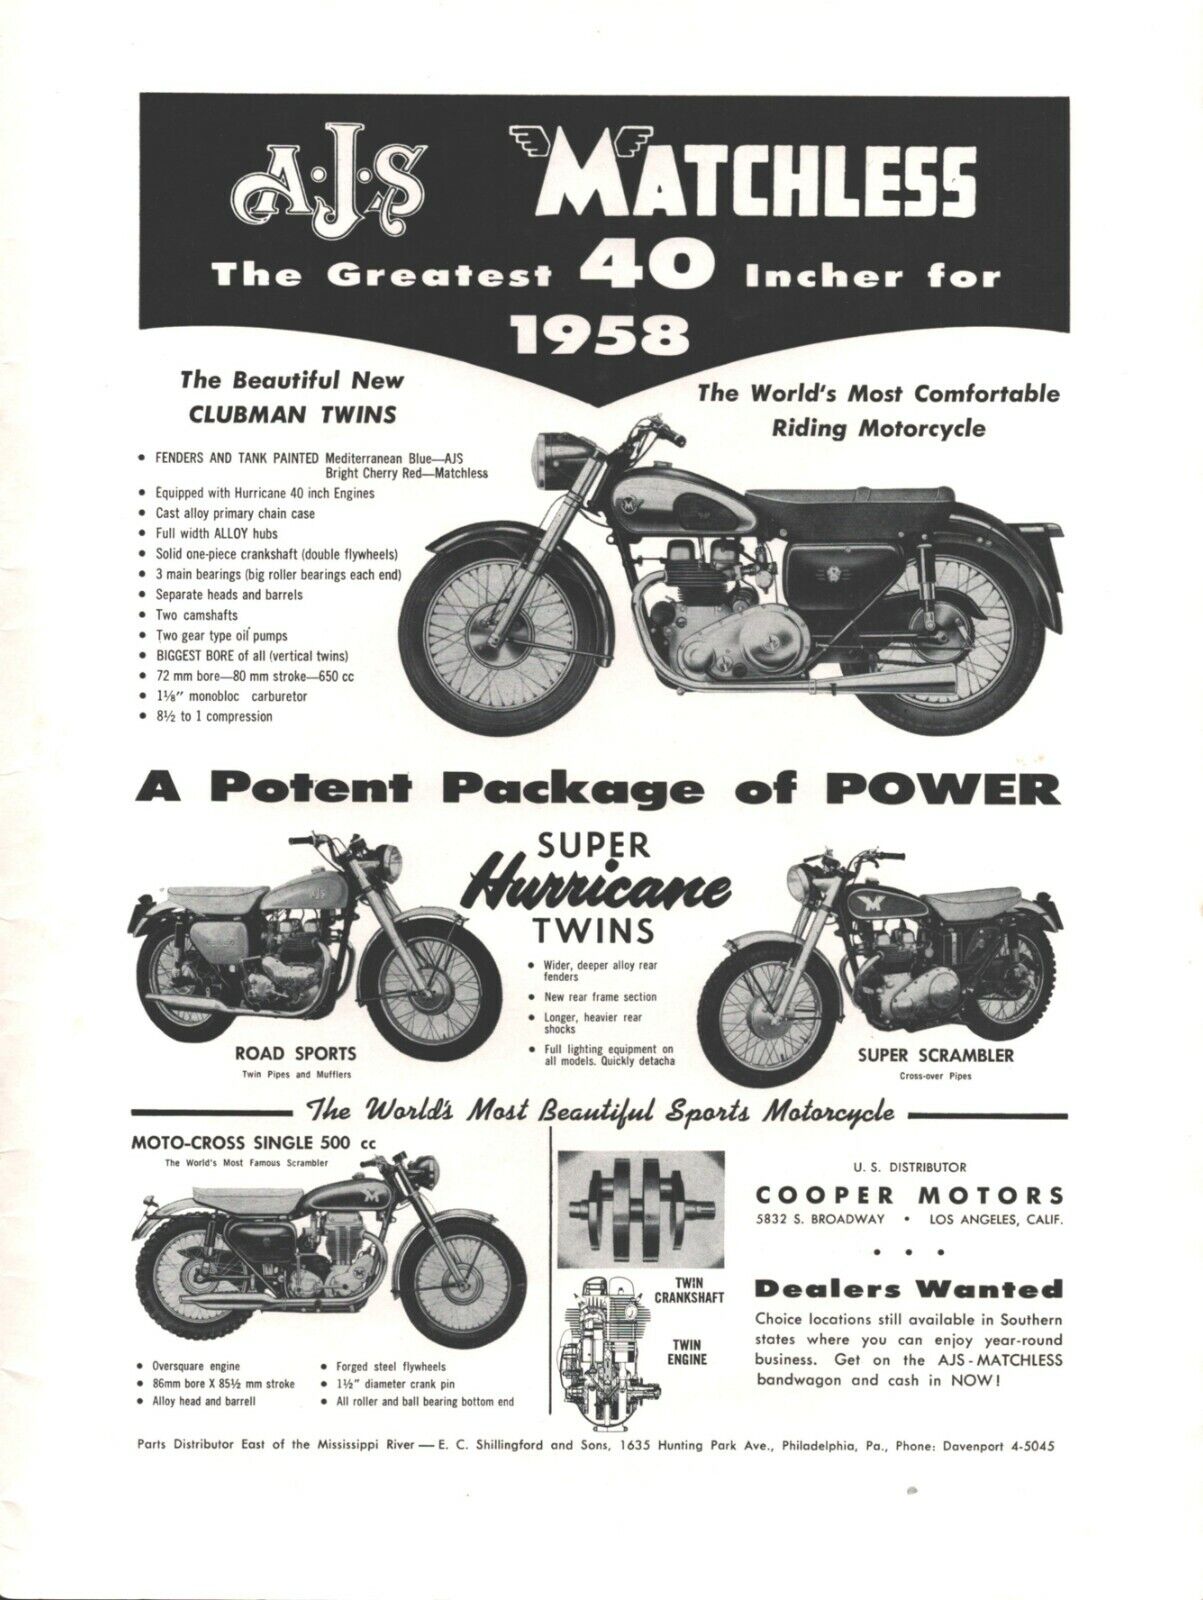 1958 AJS Matchless Motorcycles - Vintage Ad